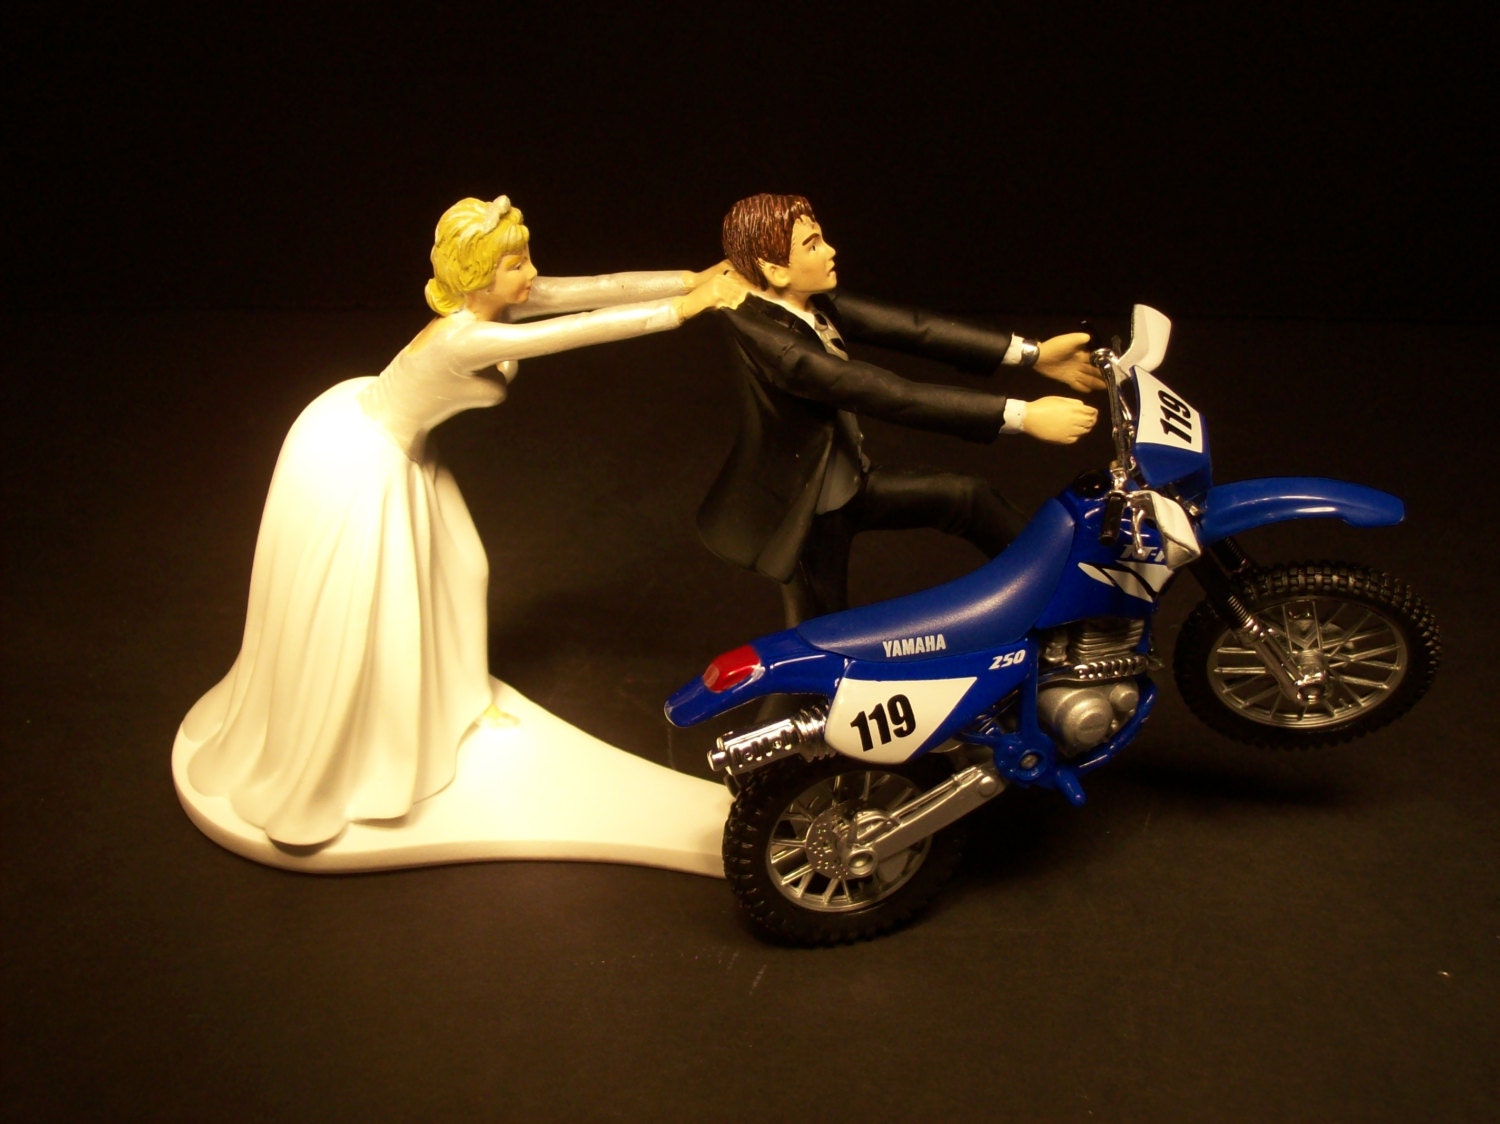 Wedding cakes with motorcycle